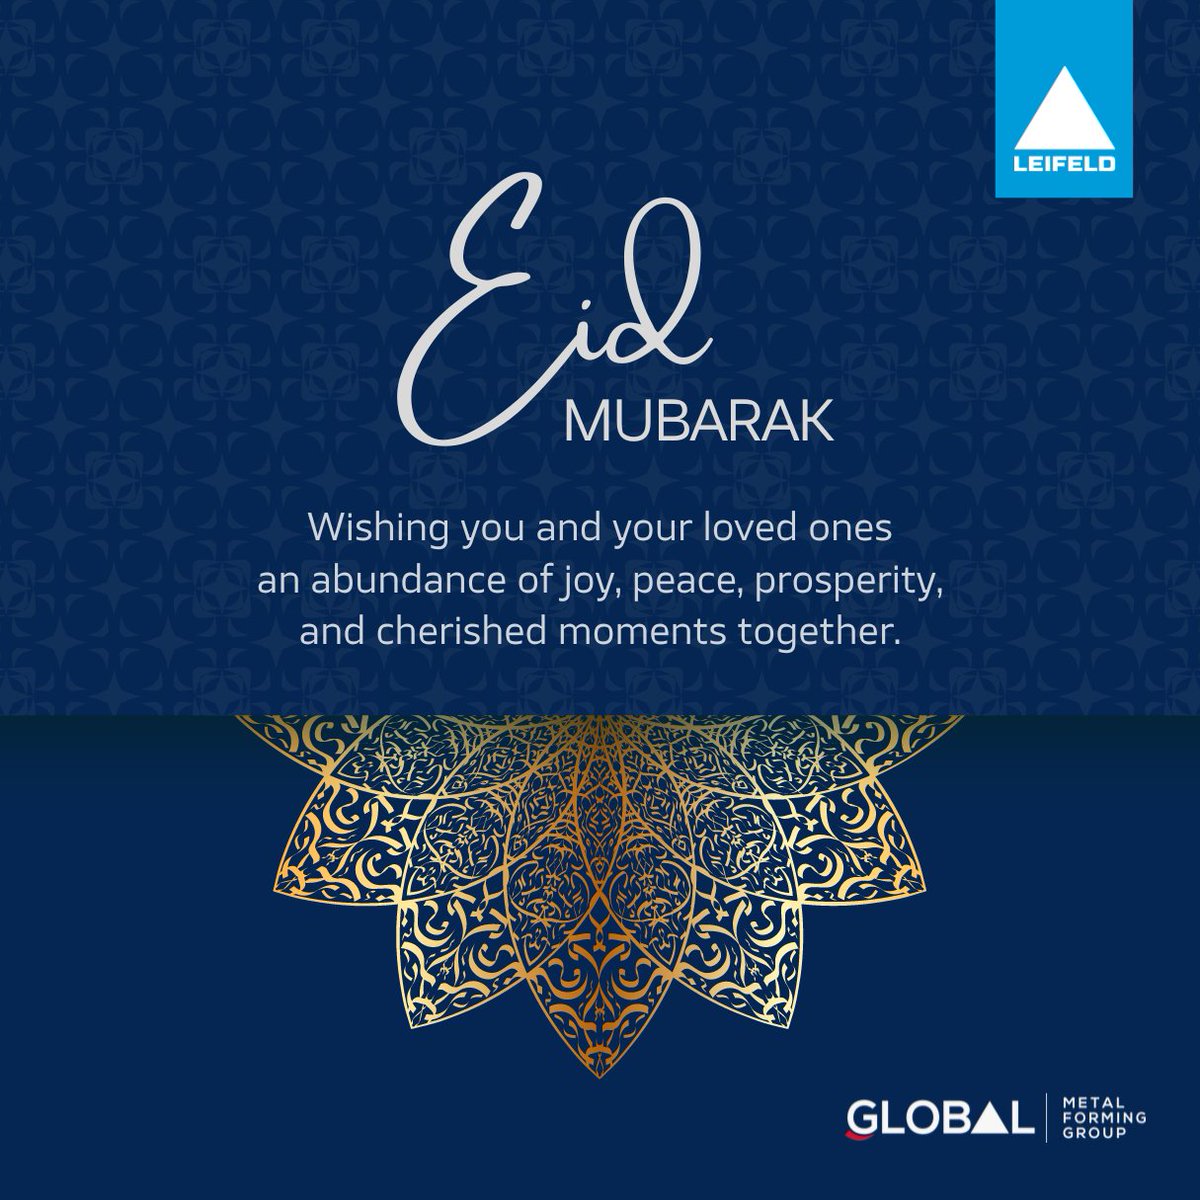 As the month of fasting concludes, Muslims around the world are celebrating 'Eid Mubarak' 🌙🕌. We send our warmest wishes to all our Muslim customers, partners, and colleagues for a joyous festival filled with love, blessings, and cherished moments. #EidMubarak #Culture #Moments